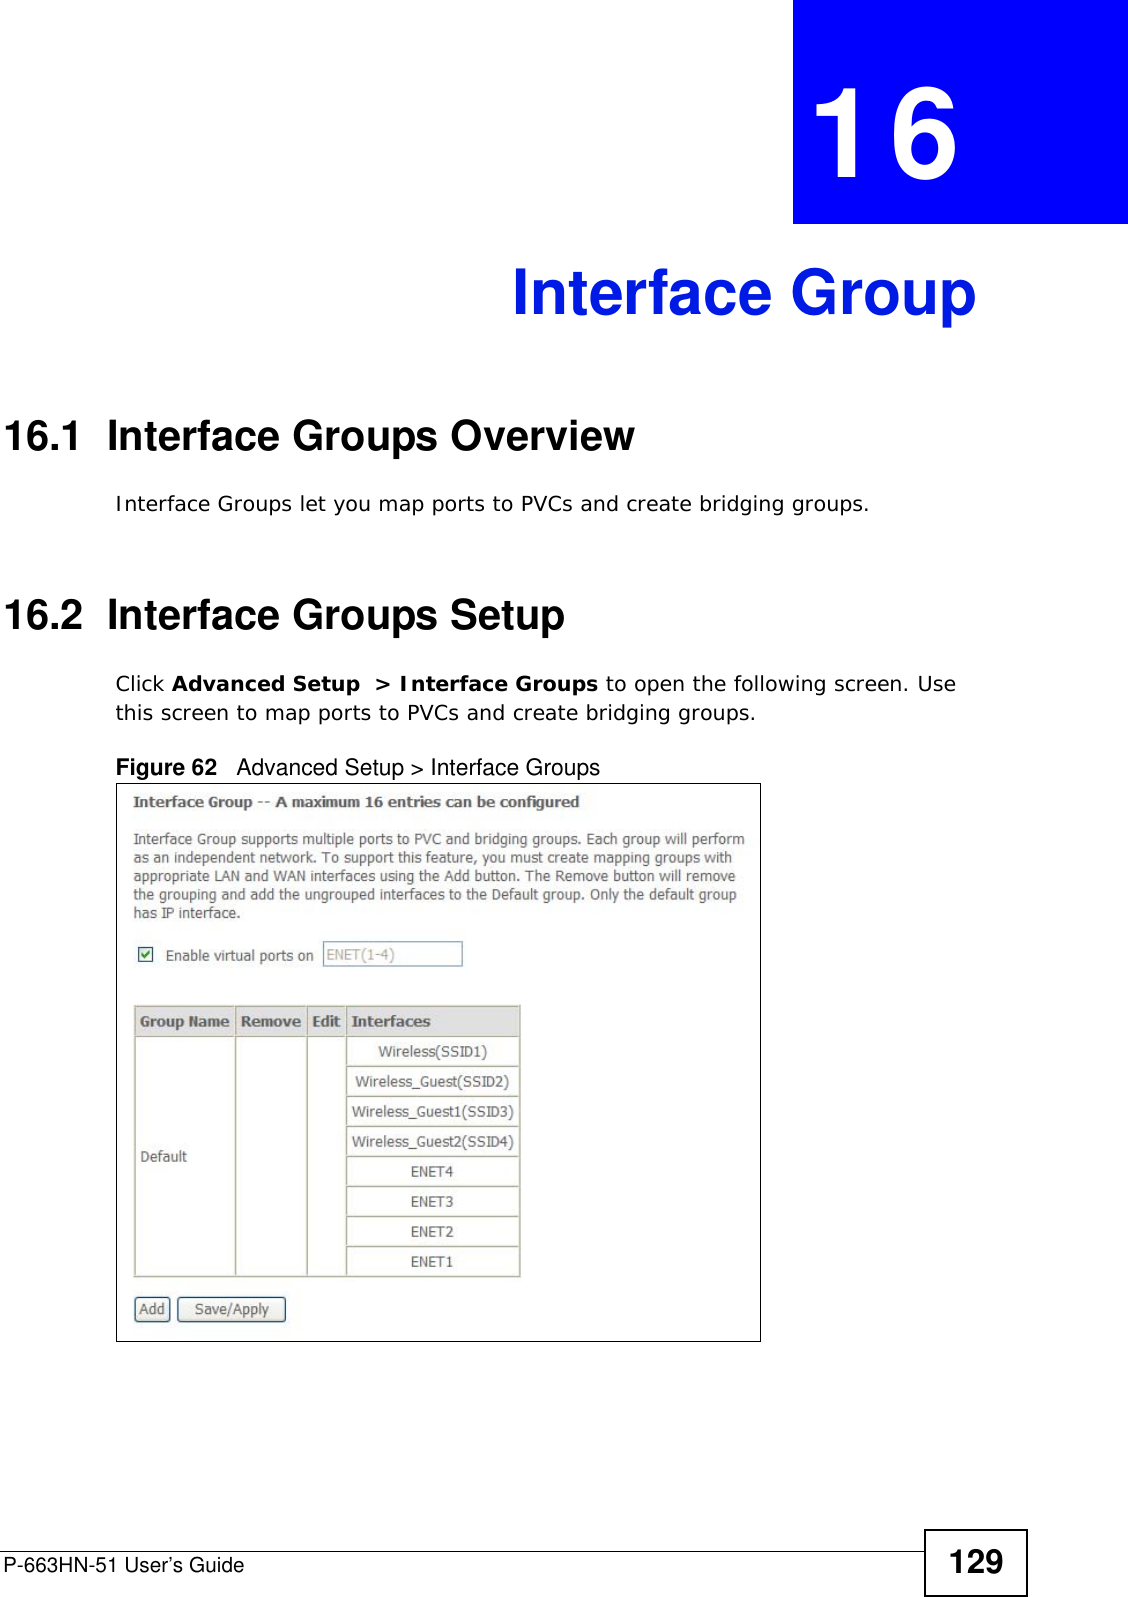 P-663HN-51 User’s Guide 129CHAPTER  16 Interface Group16.1  Interface Groups OverviewInterface Groups let you map ports to PVCs and create bridging groups.16.2  Interface Groups Setup Click Advanced Setup  &gt; Interface Groups to open the following screen. Use this screen to map ports to PVCs and create bridging groups. Figure 62   Advanced Setup &gt; Interface Groups 